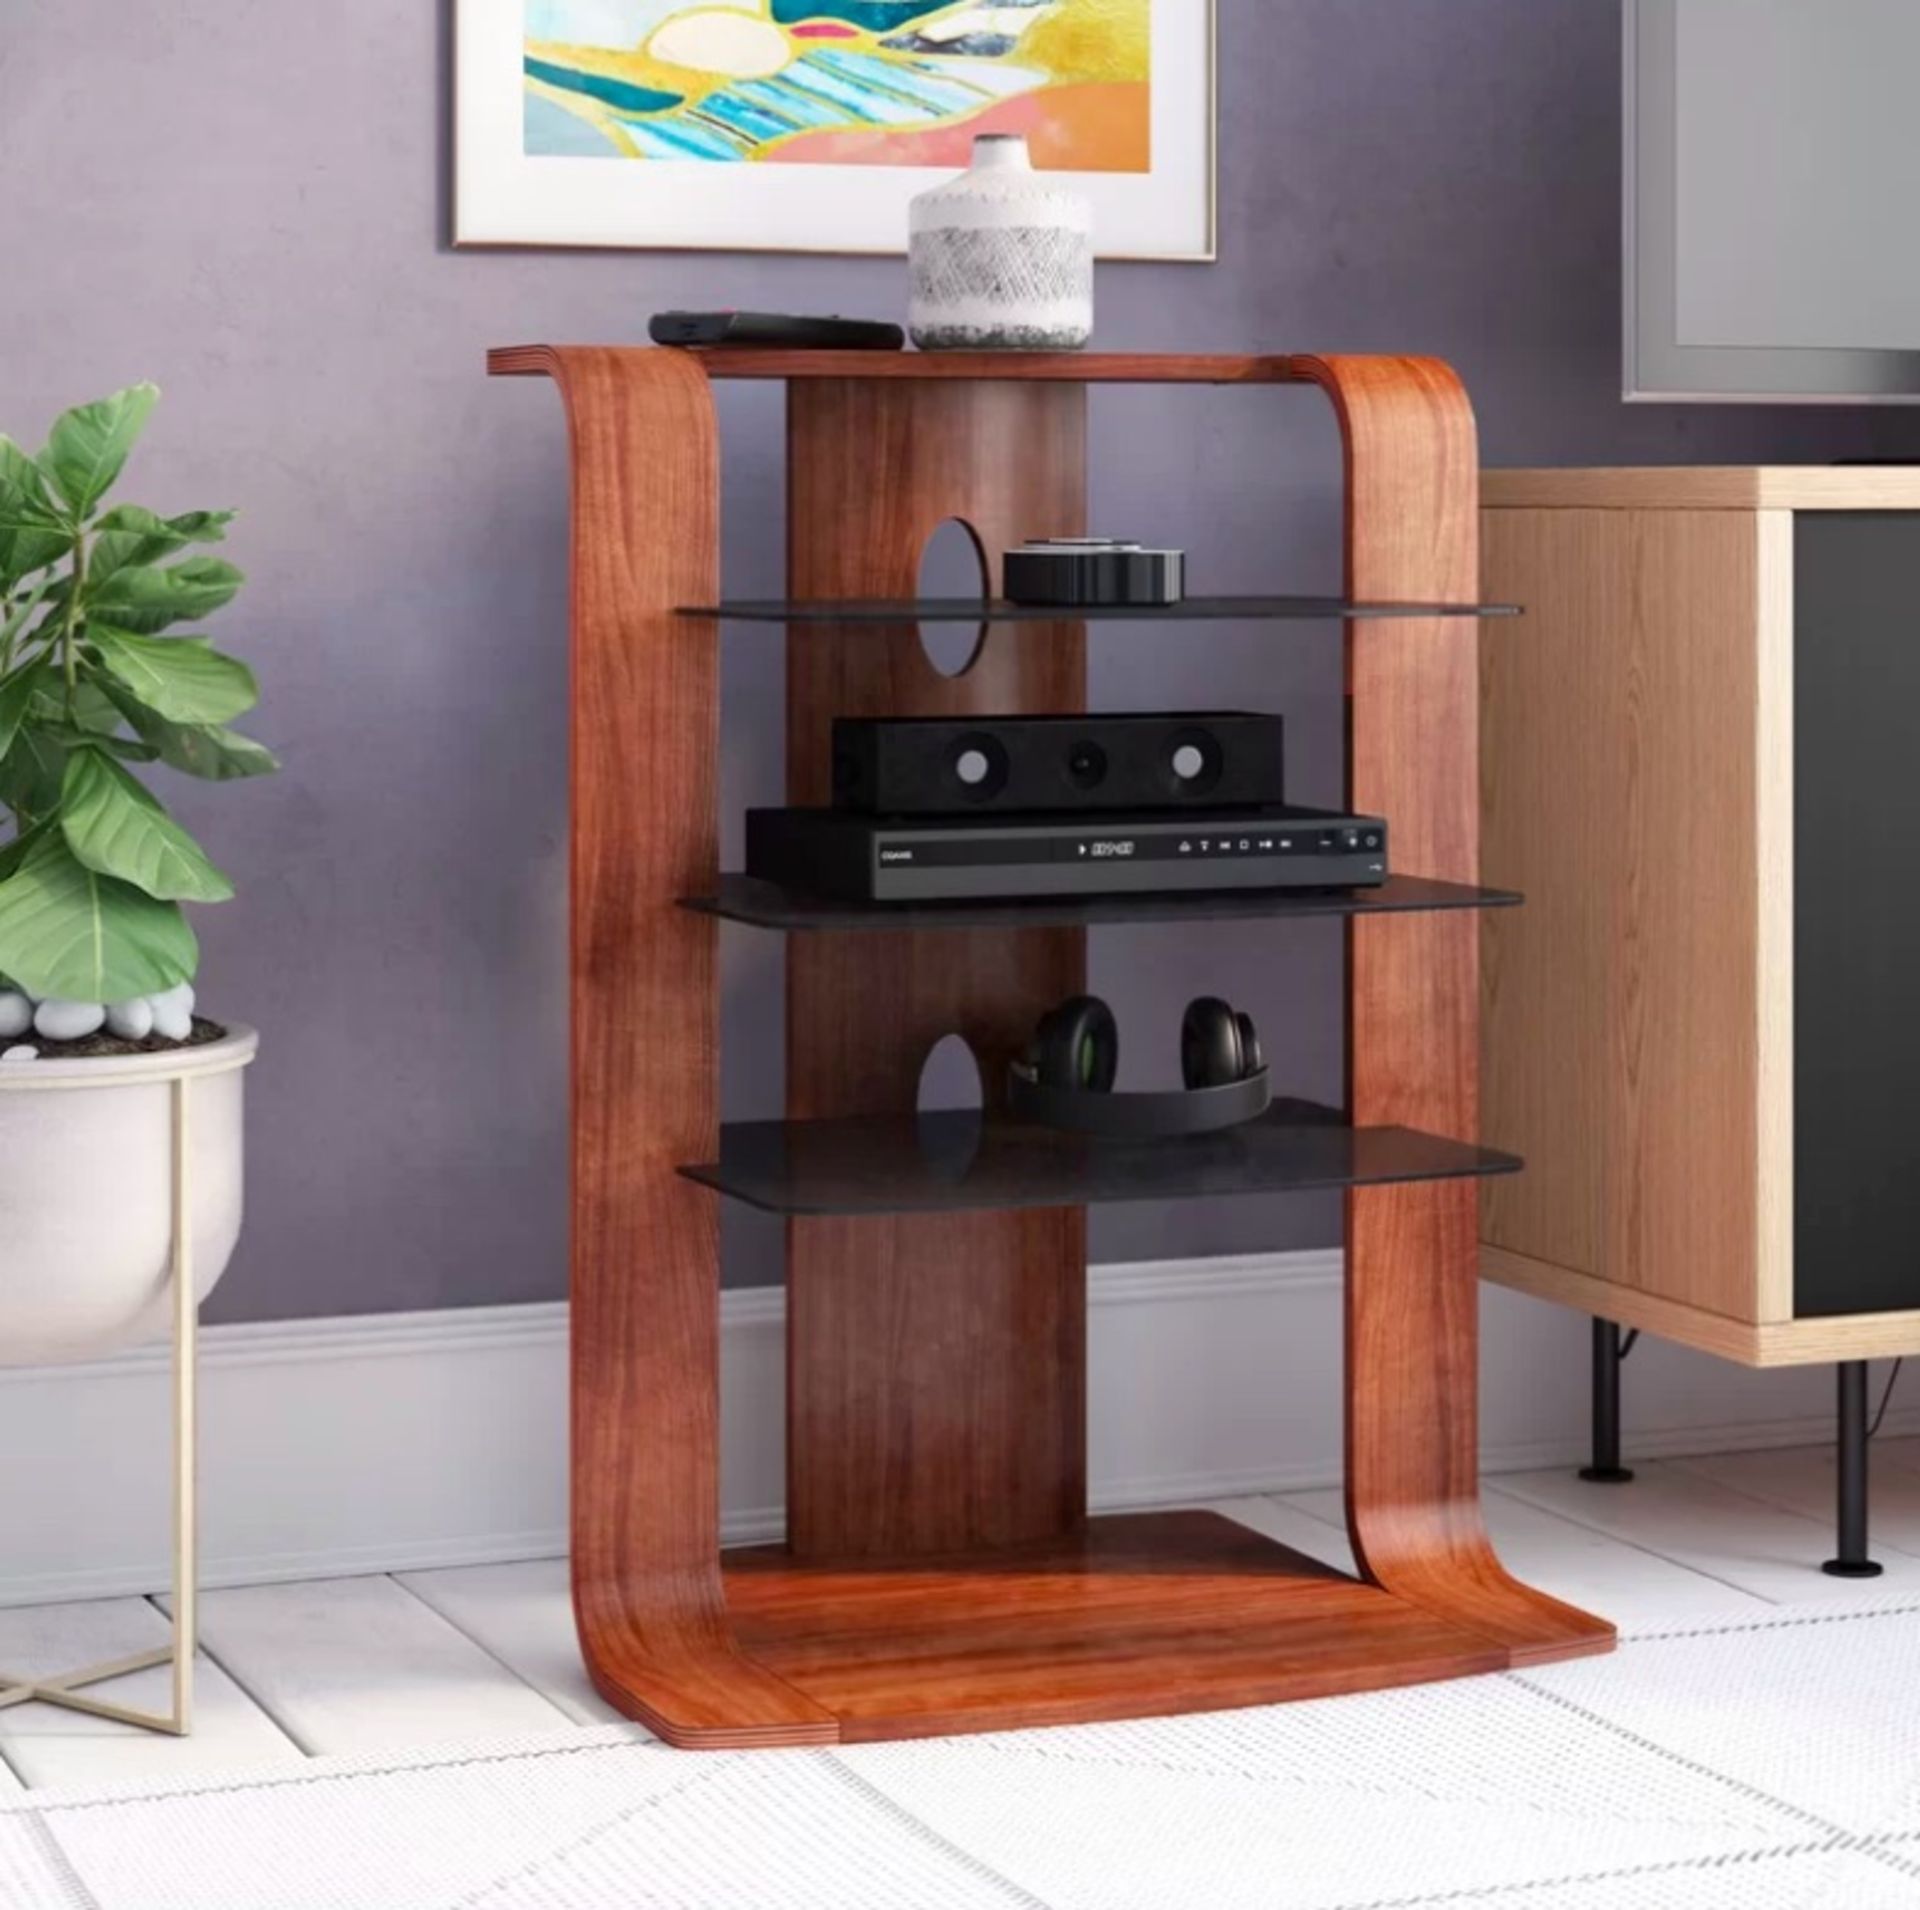 Sleek Hi-Fi Stand Sleek And Smart Innovative Design Mixing Traditional Wood With Modern Contemporary